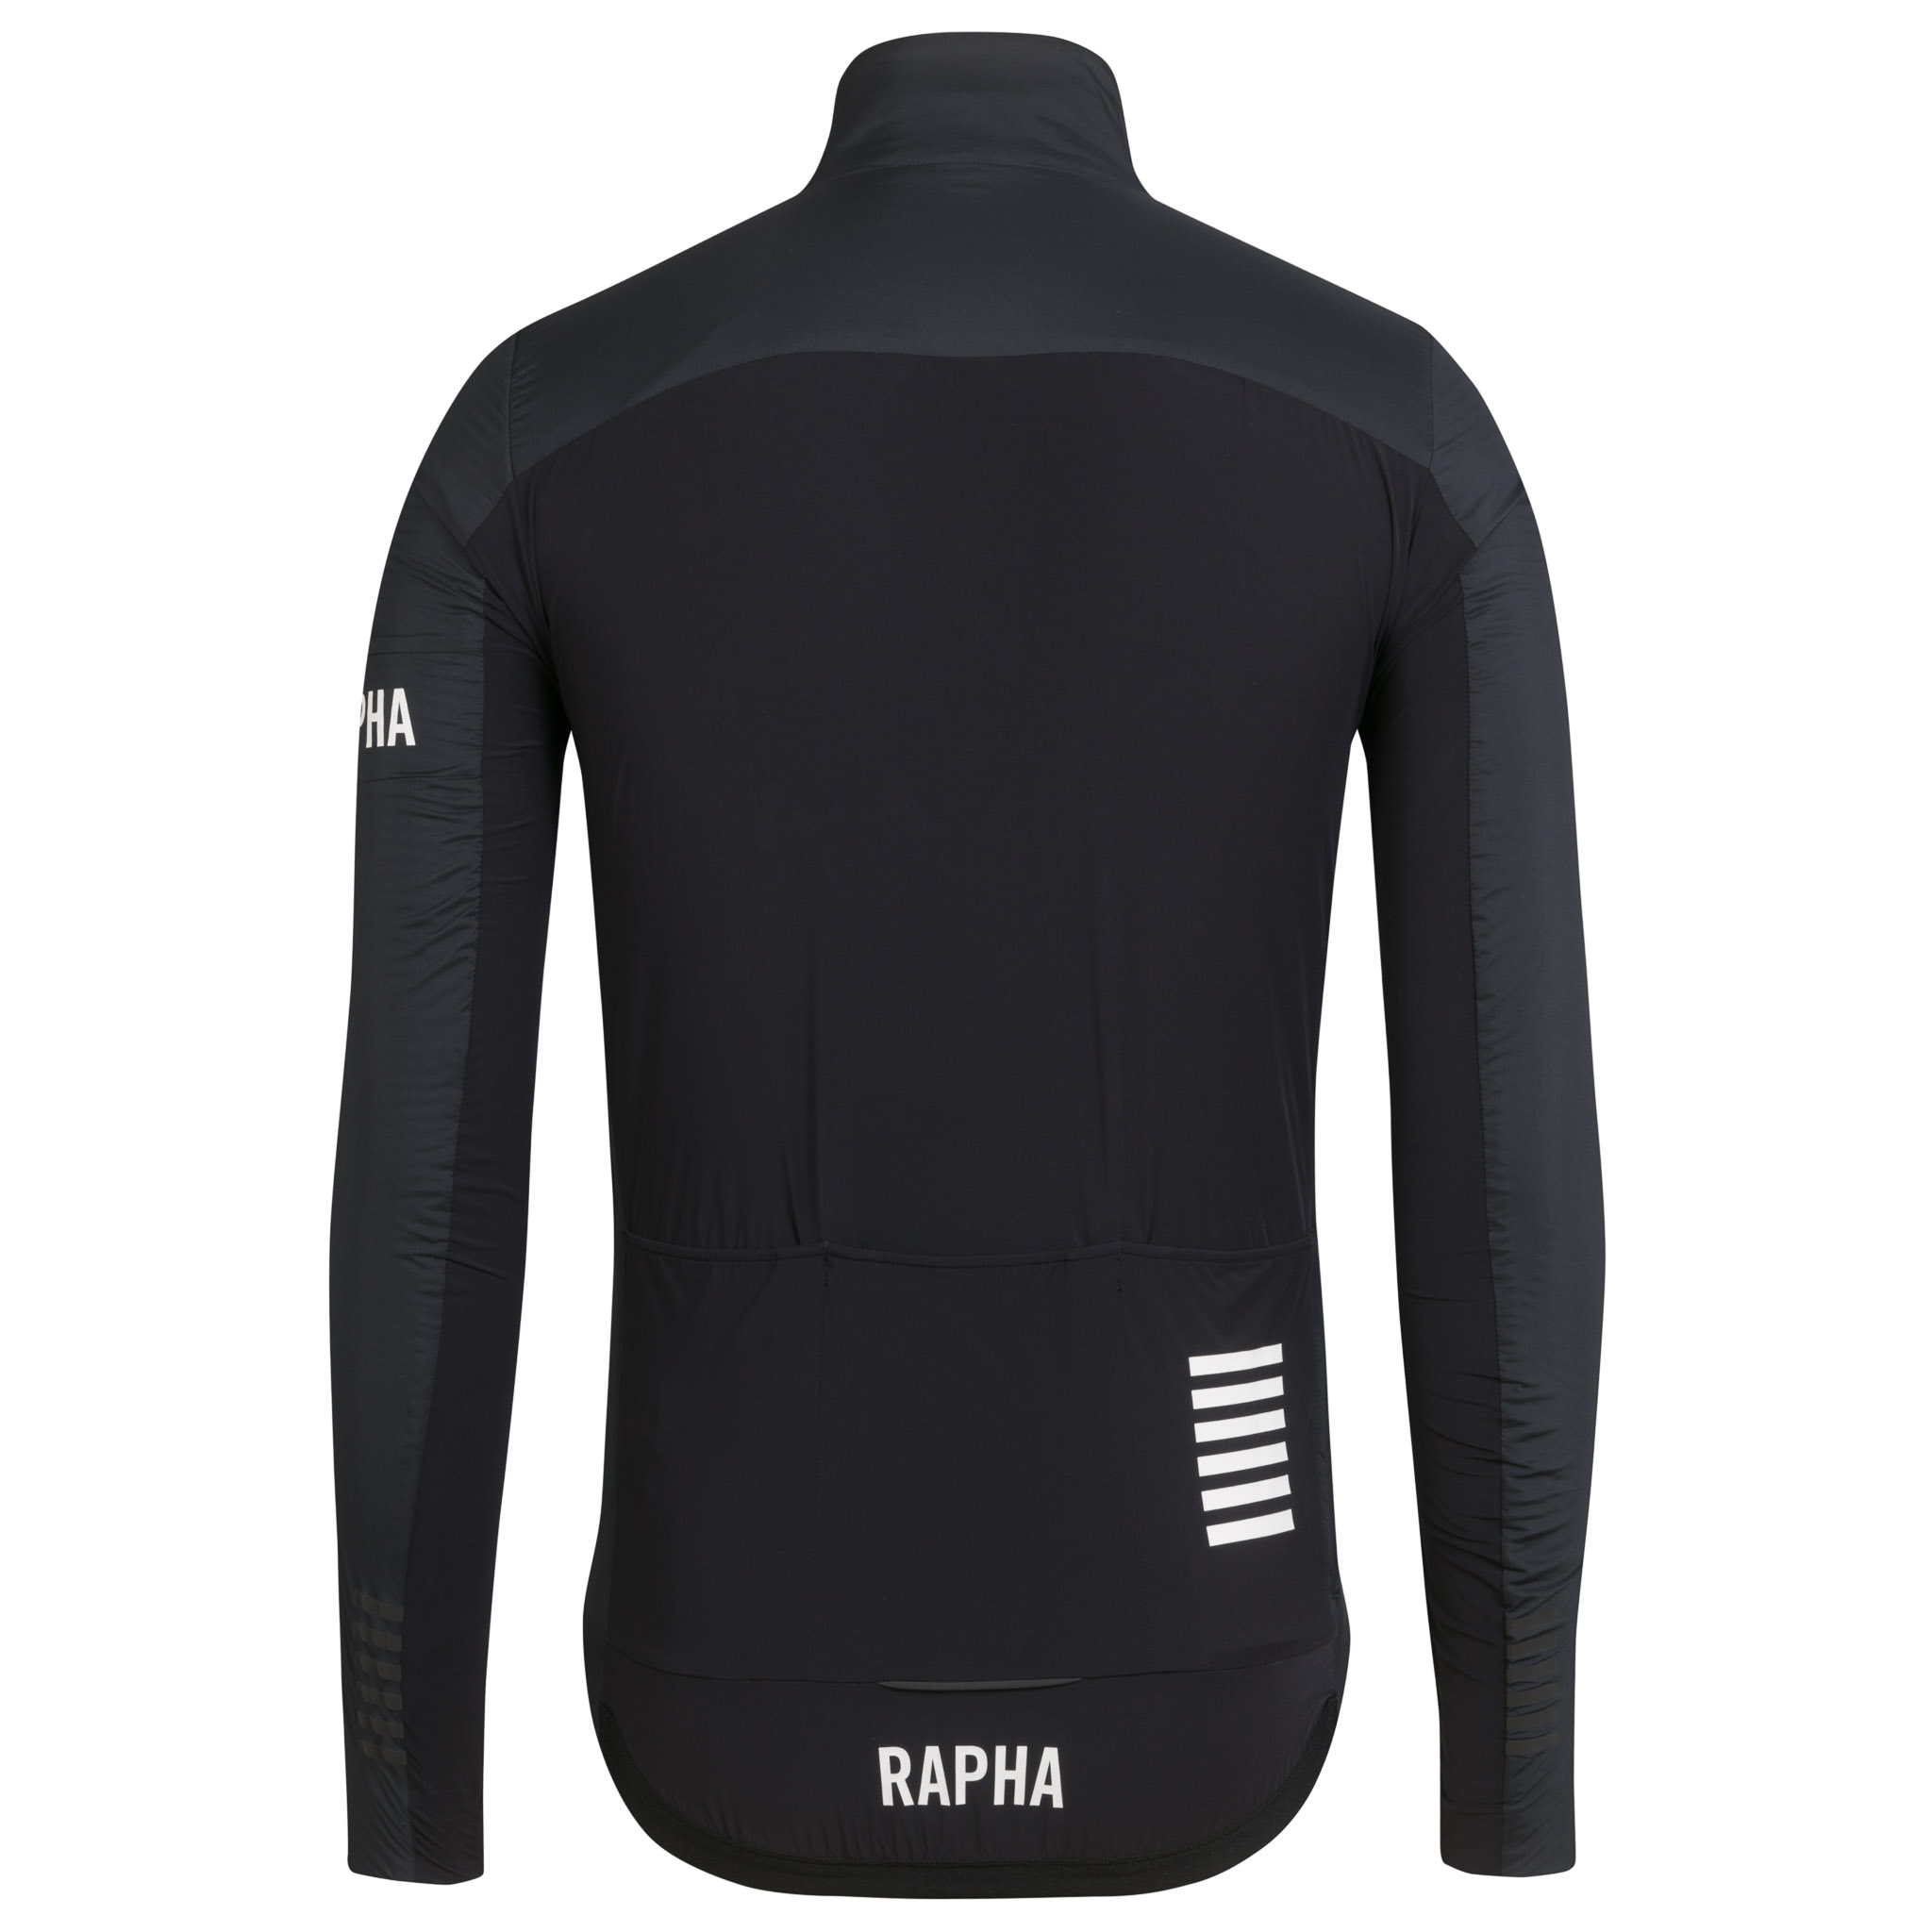 Men's Pro Team Thermal Base layer with Collar, Winter Cold Weather Cycling